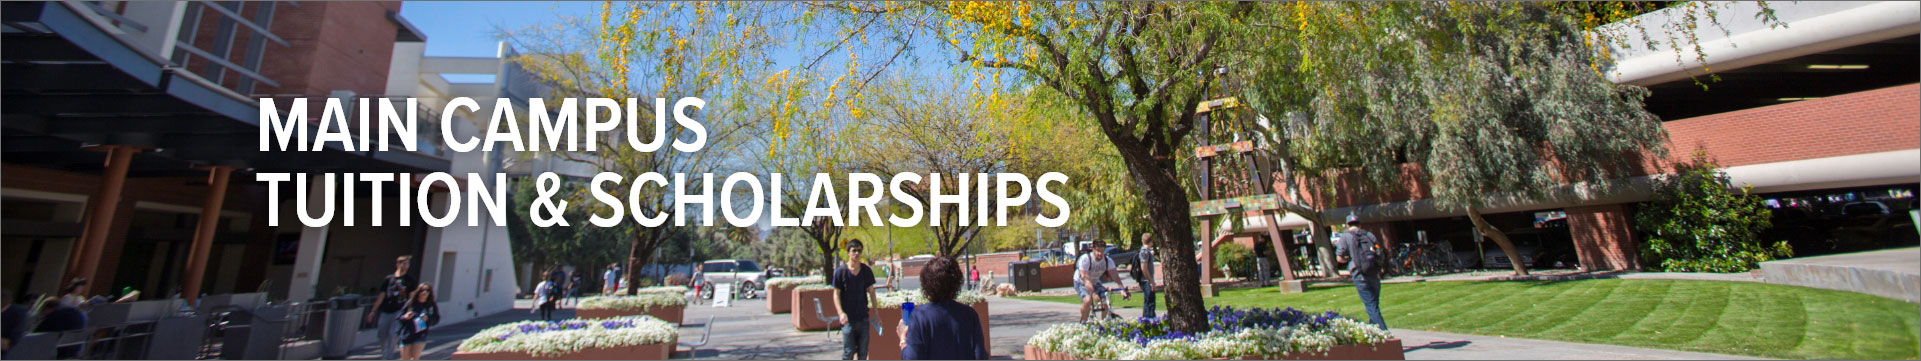 Main Campus Tuition & Scholarships